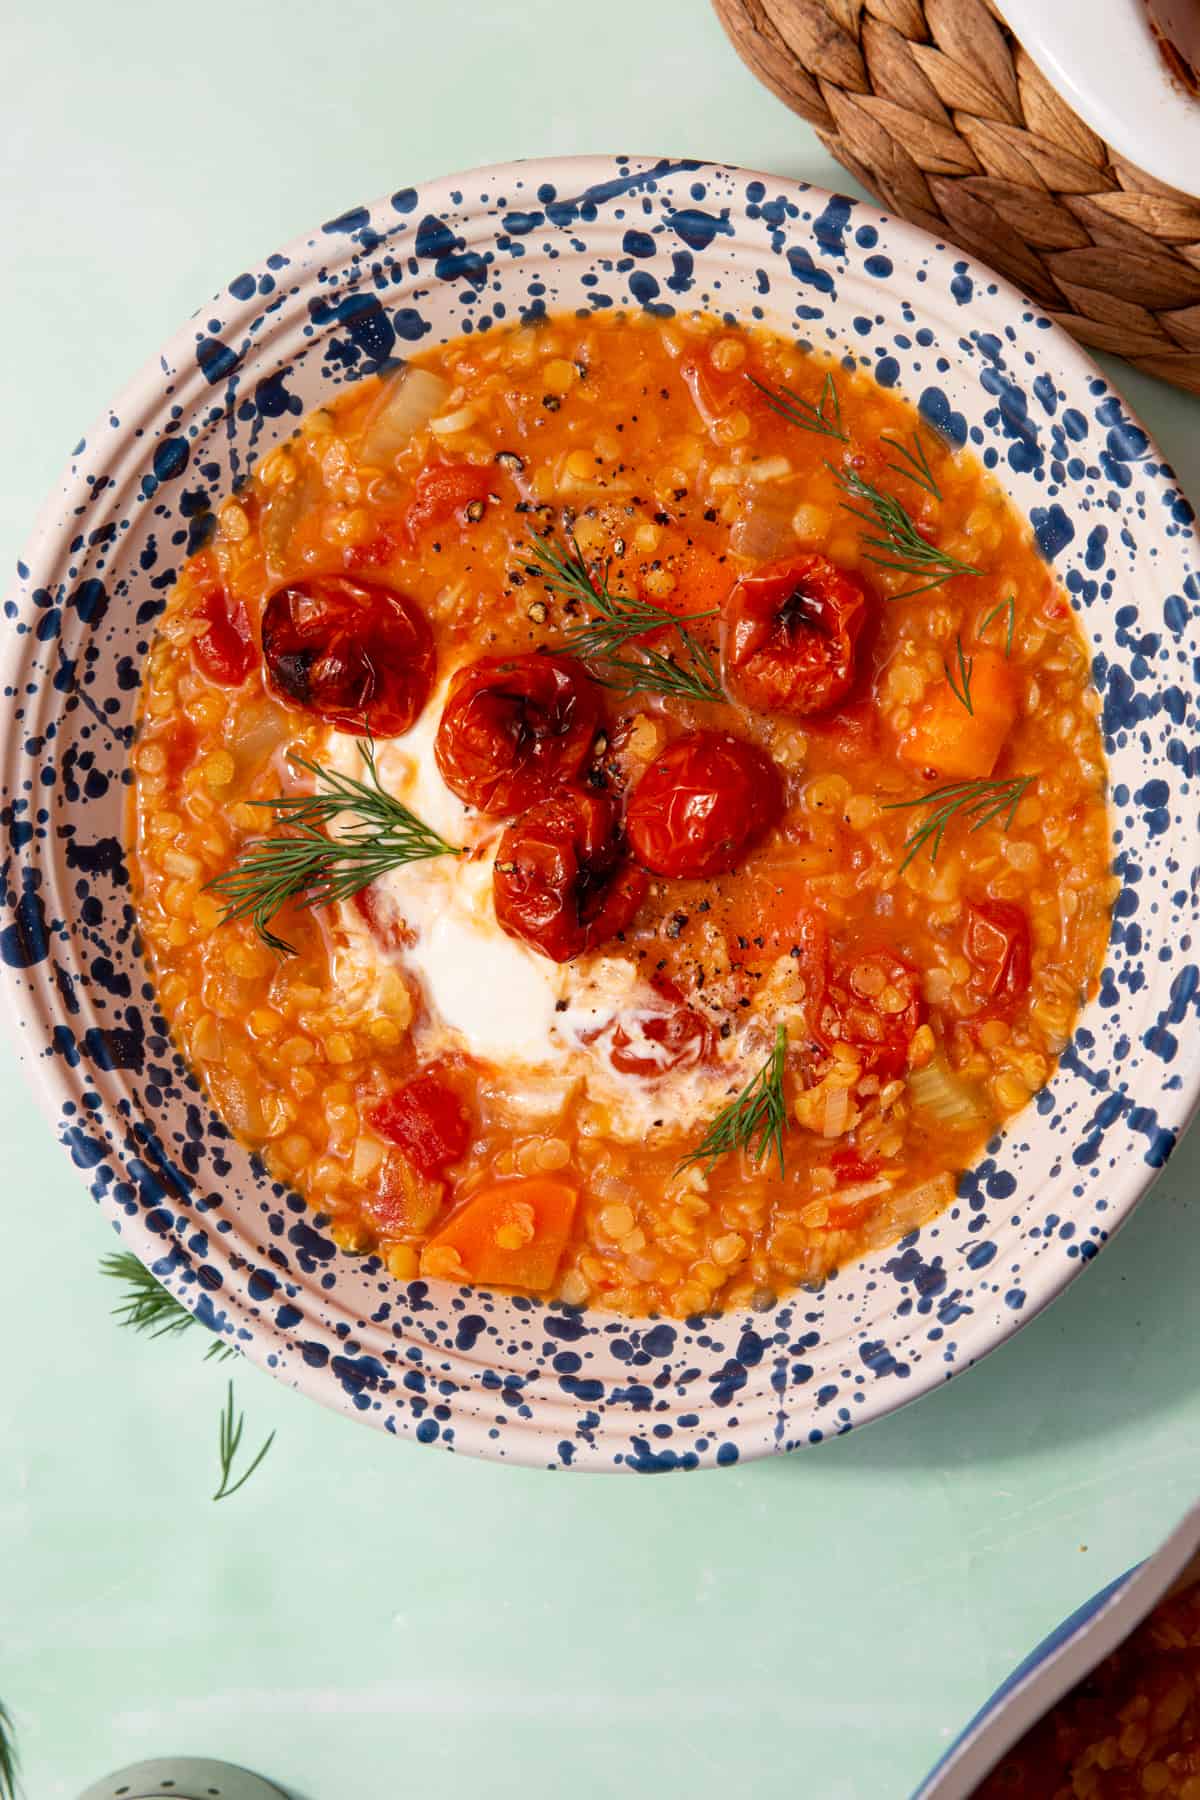 A patterned bowl full of red lentil soup with roasted cherry tomatoes, some dill and a dollop of creme fraiche.